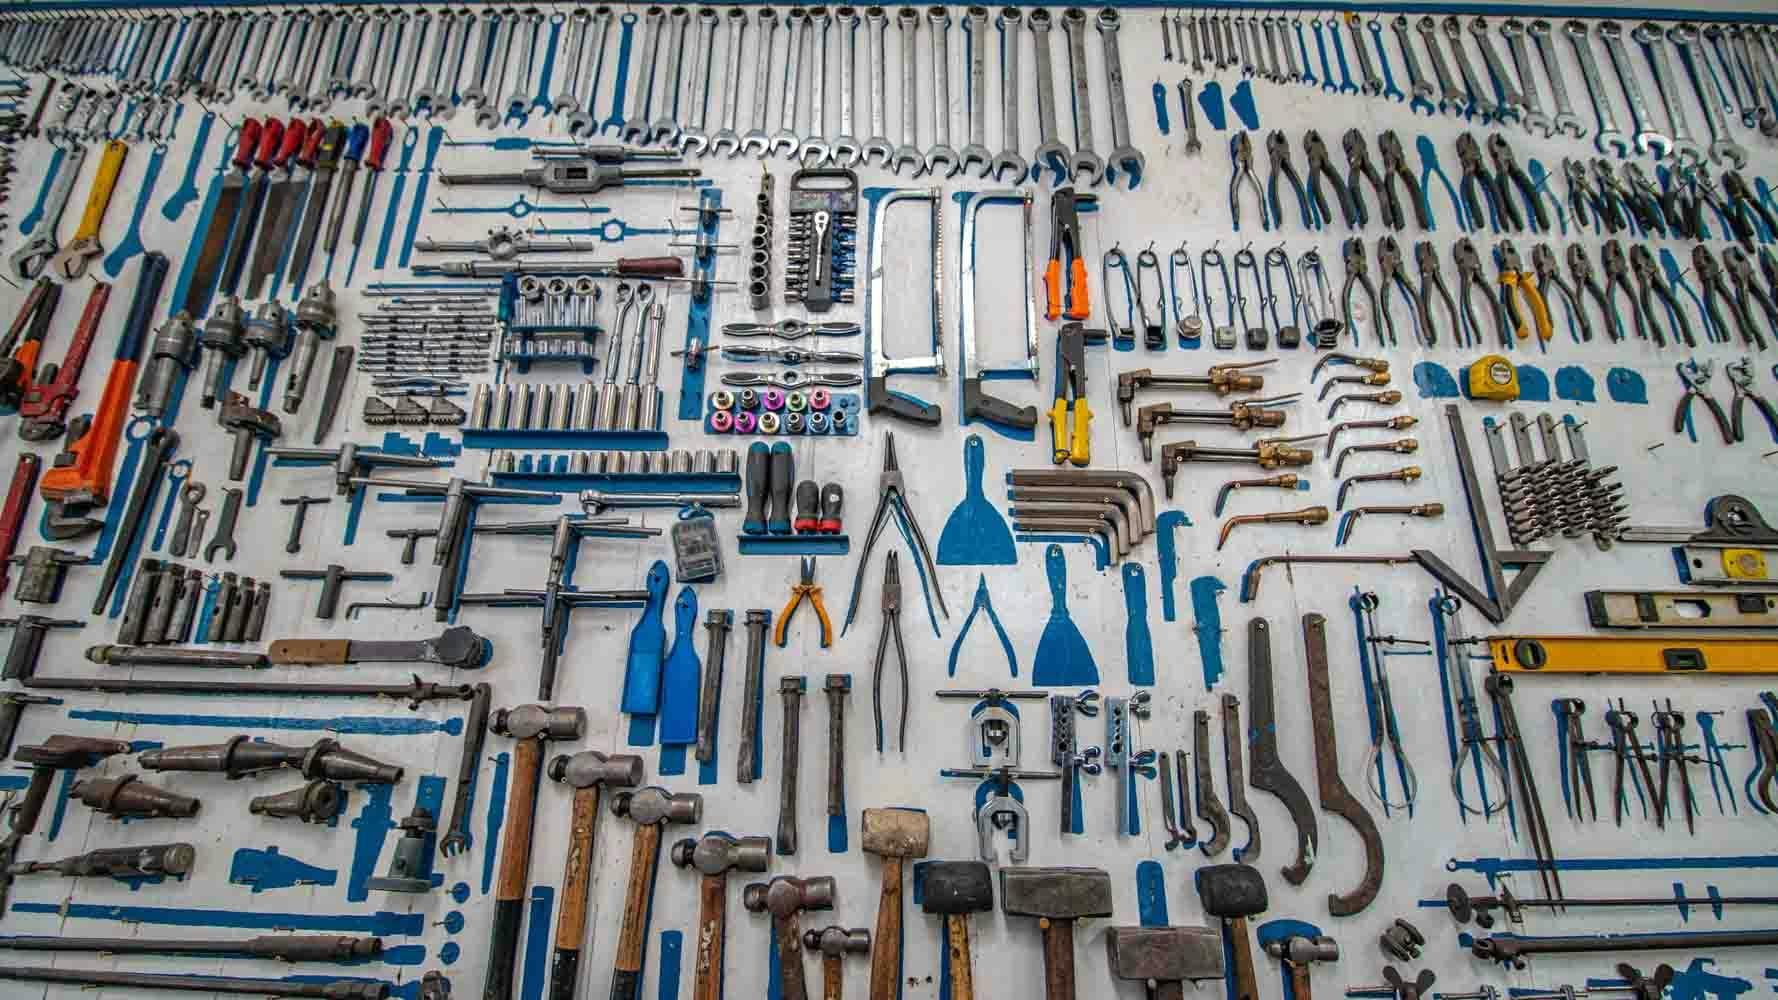 Handheld tool lot on a large table